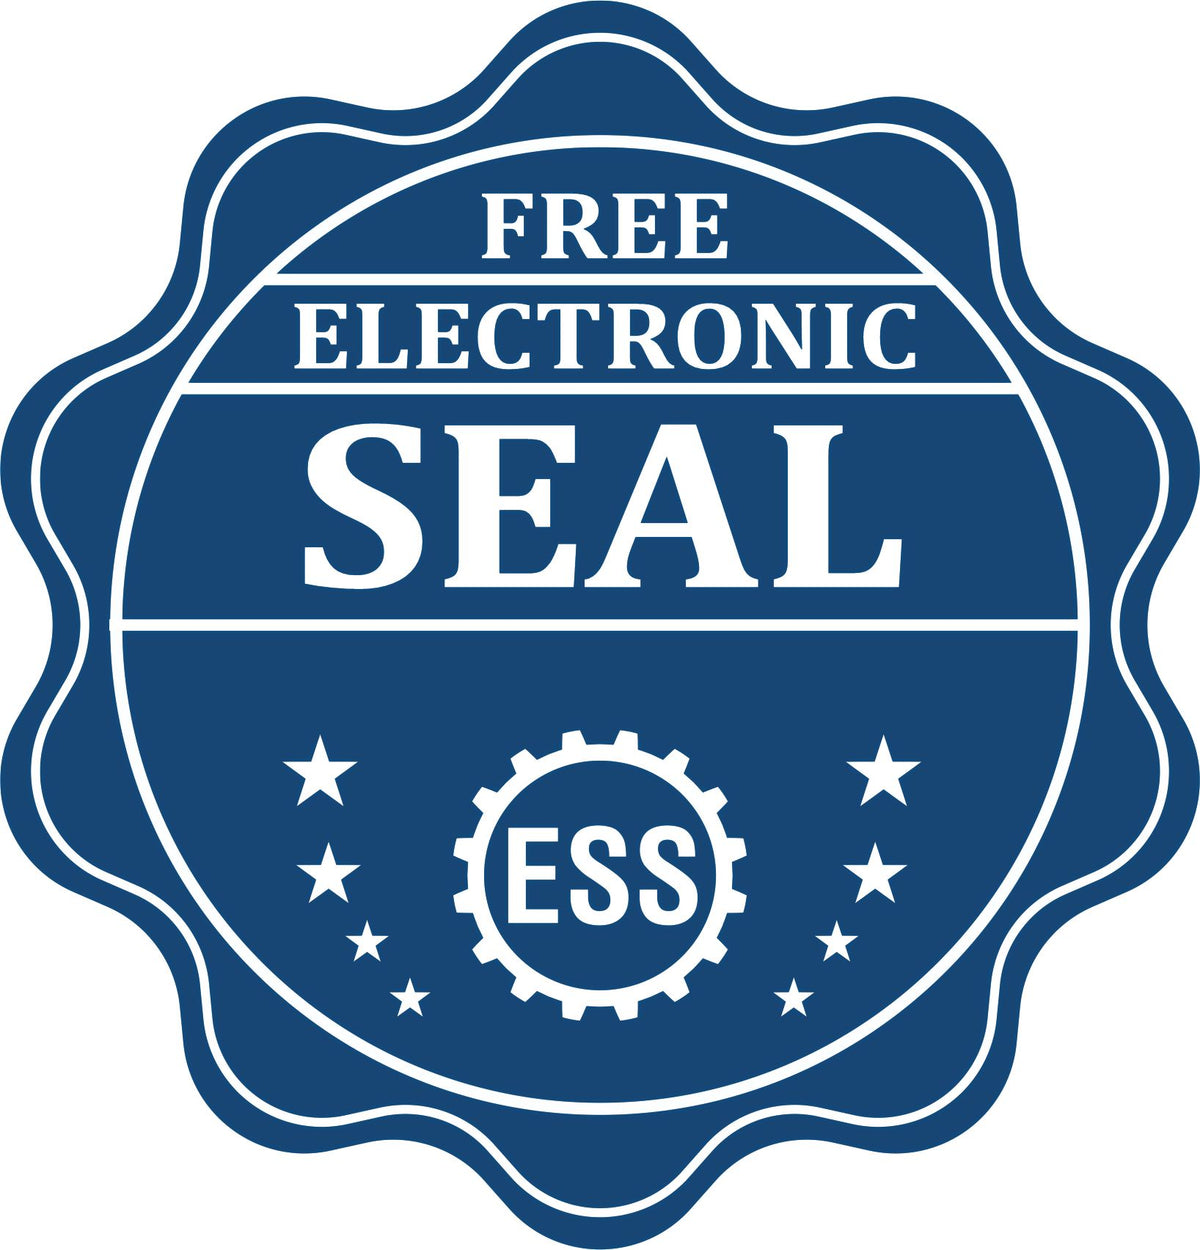 A badge showing a free electronic seal for the Long Reach Colorado Land Surveyor Seal with stars and the ESS gear on the emblem.